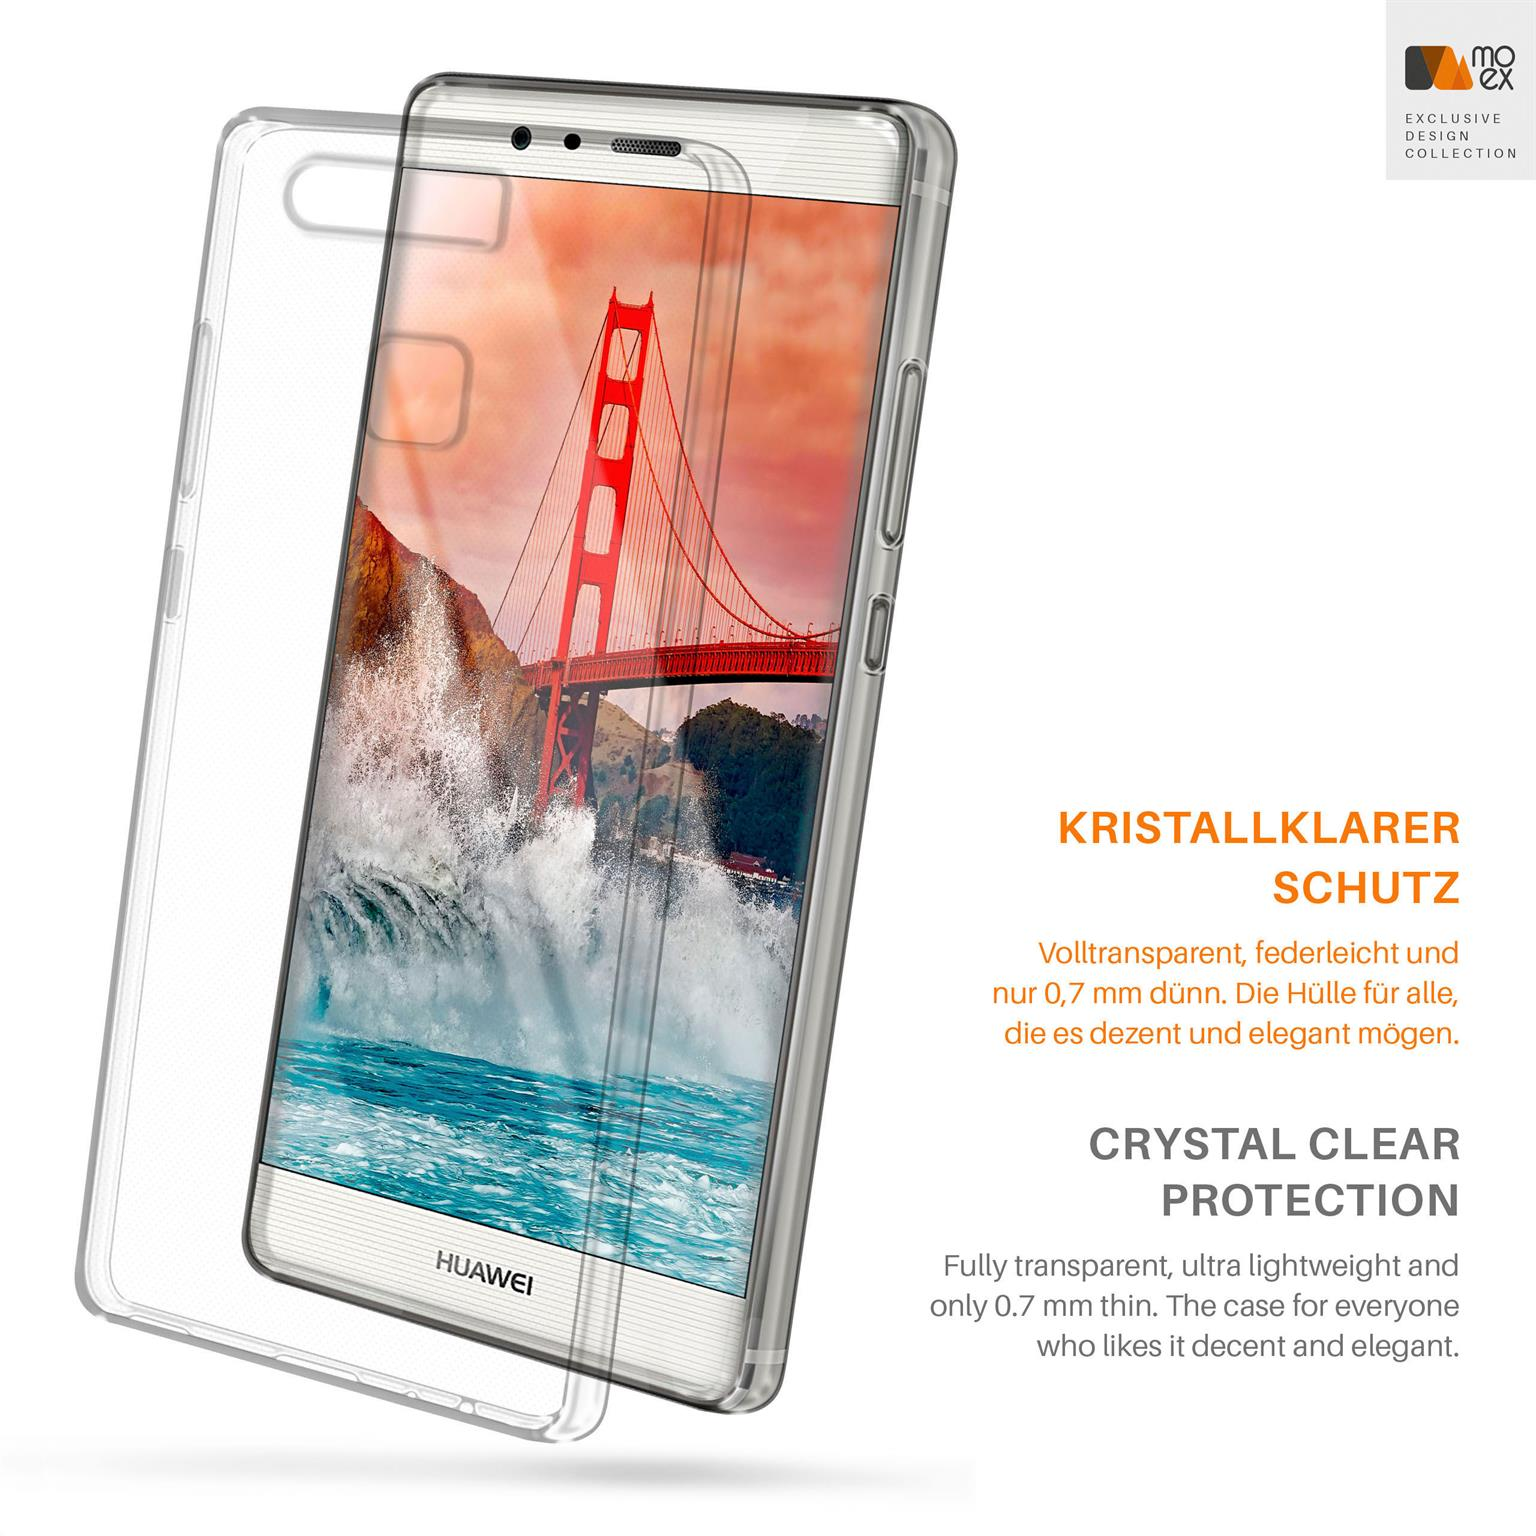 MOEX P9, Crystal-Clear Huawei, Backcover, Case, Aero